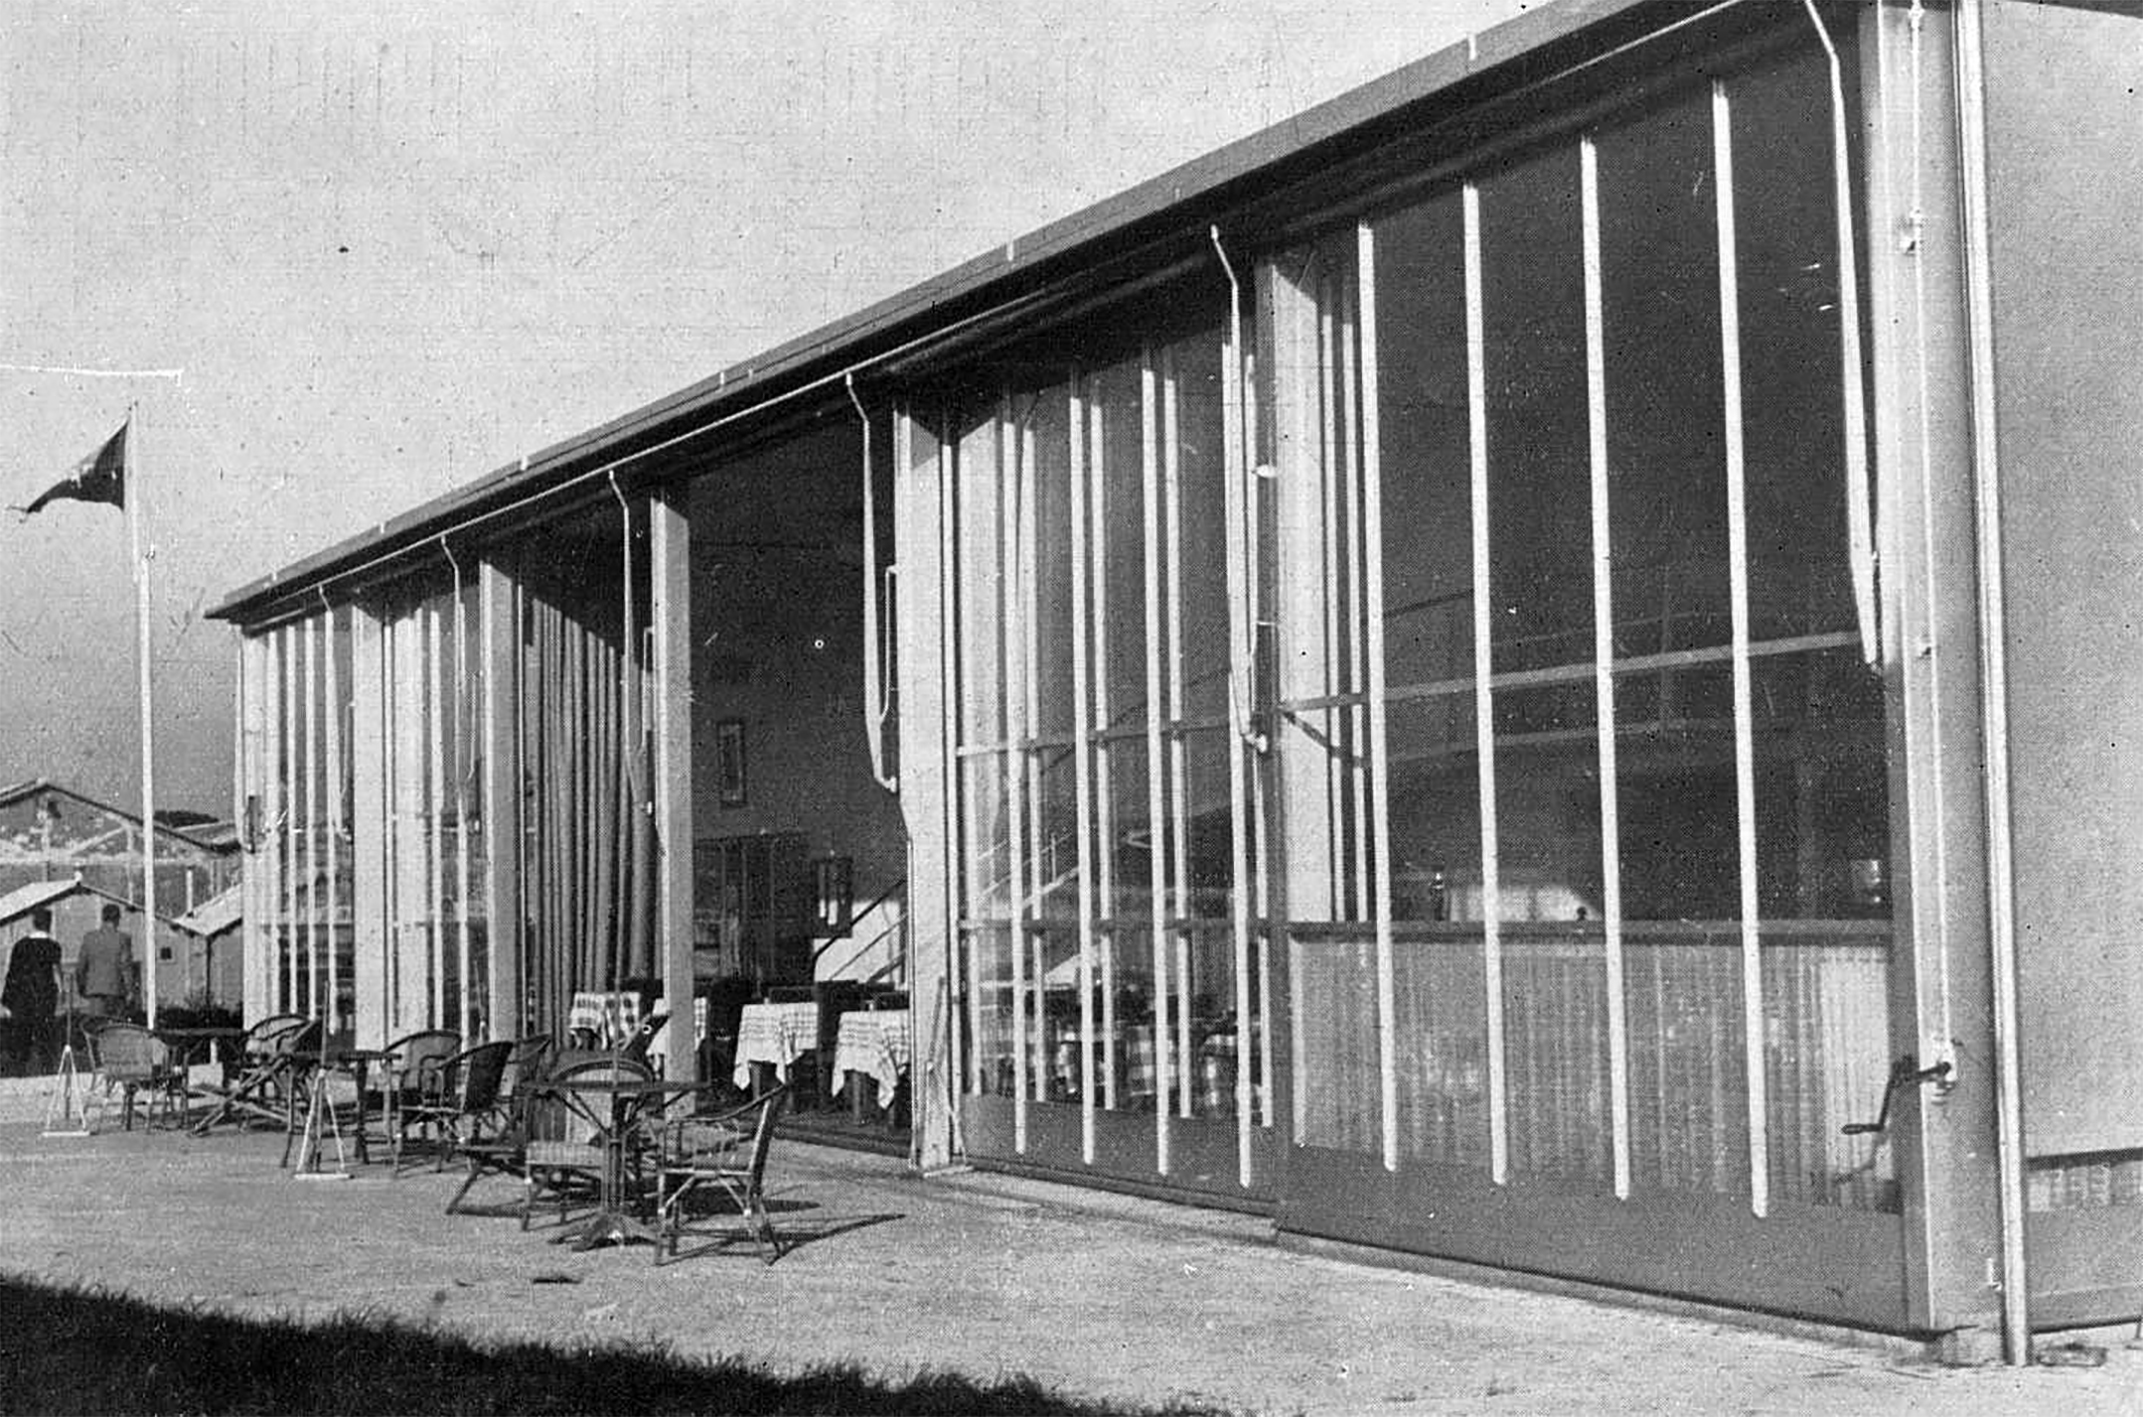 Roland Garros Flying Club, Buc, 1935 (Jean Prouvé, with architects Eugène Beaudouin and Marcel Lods) in <i>L’Architecture,</i> no. 4, April 1938.